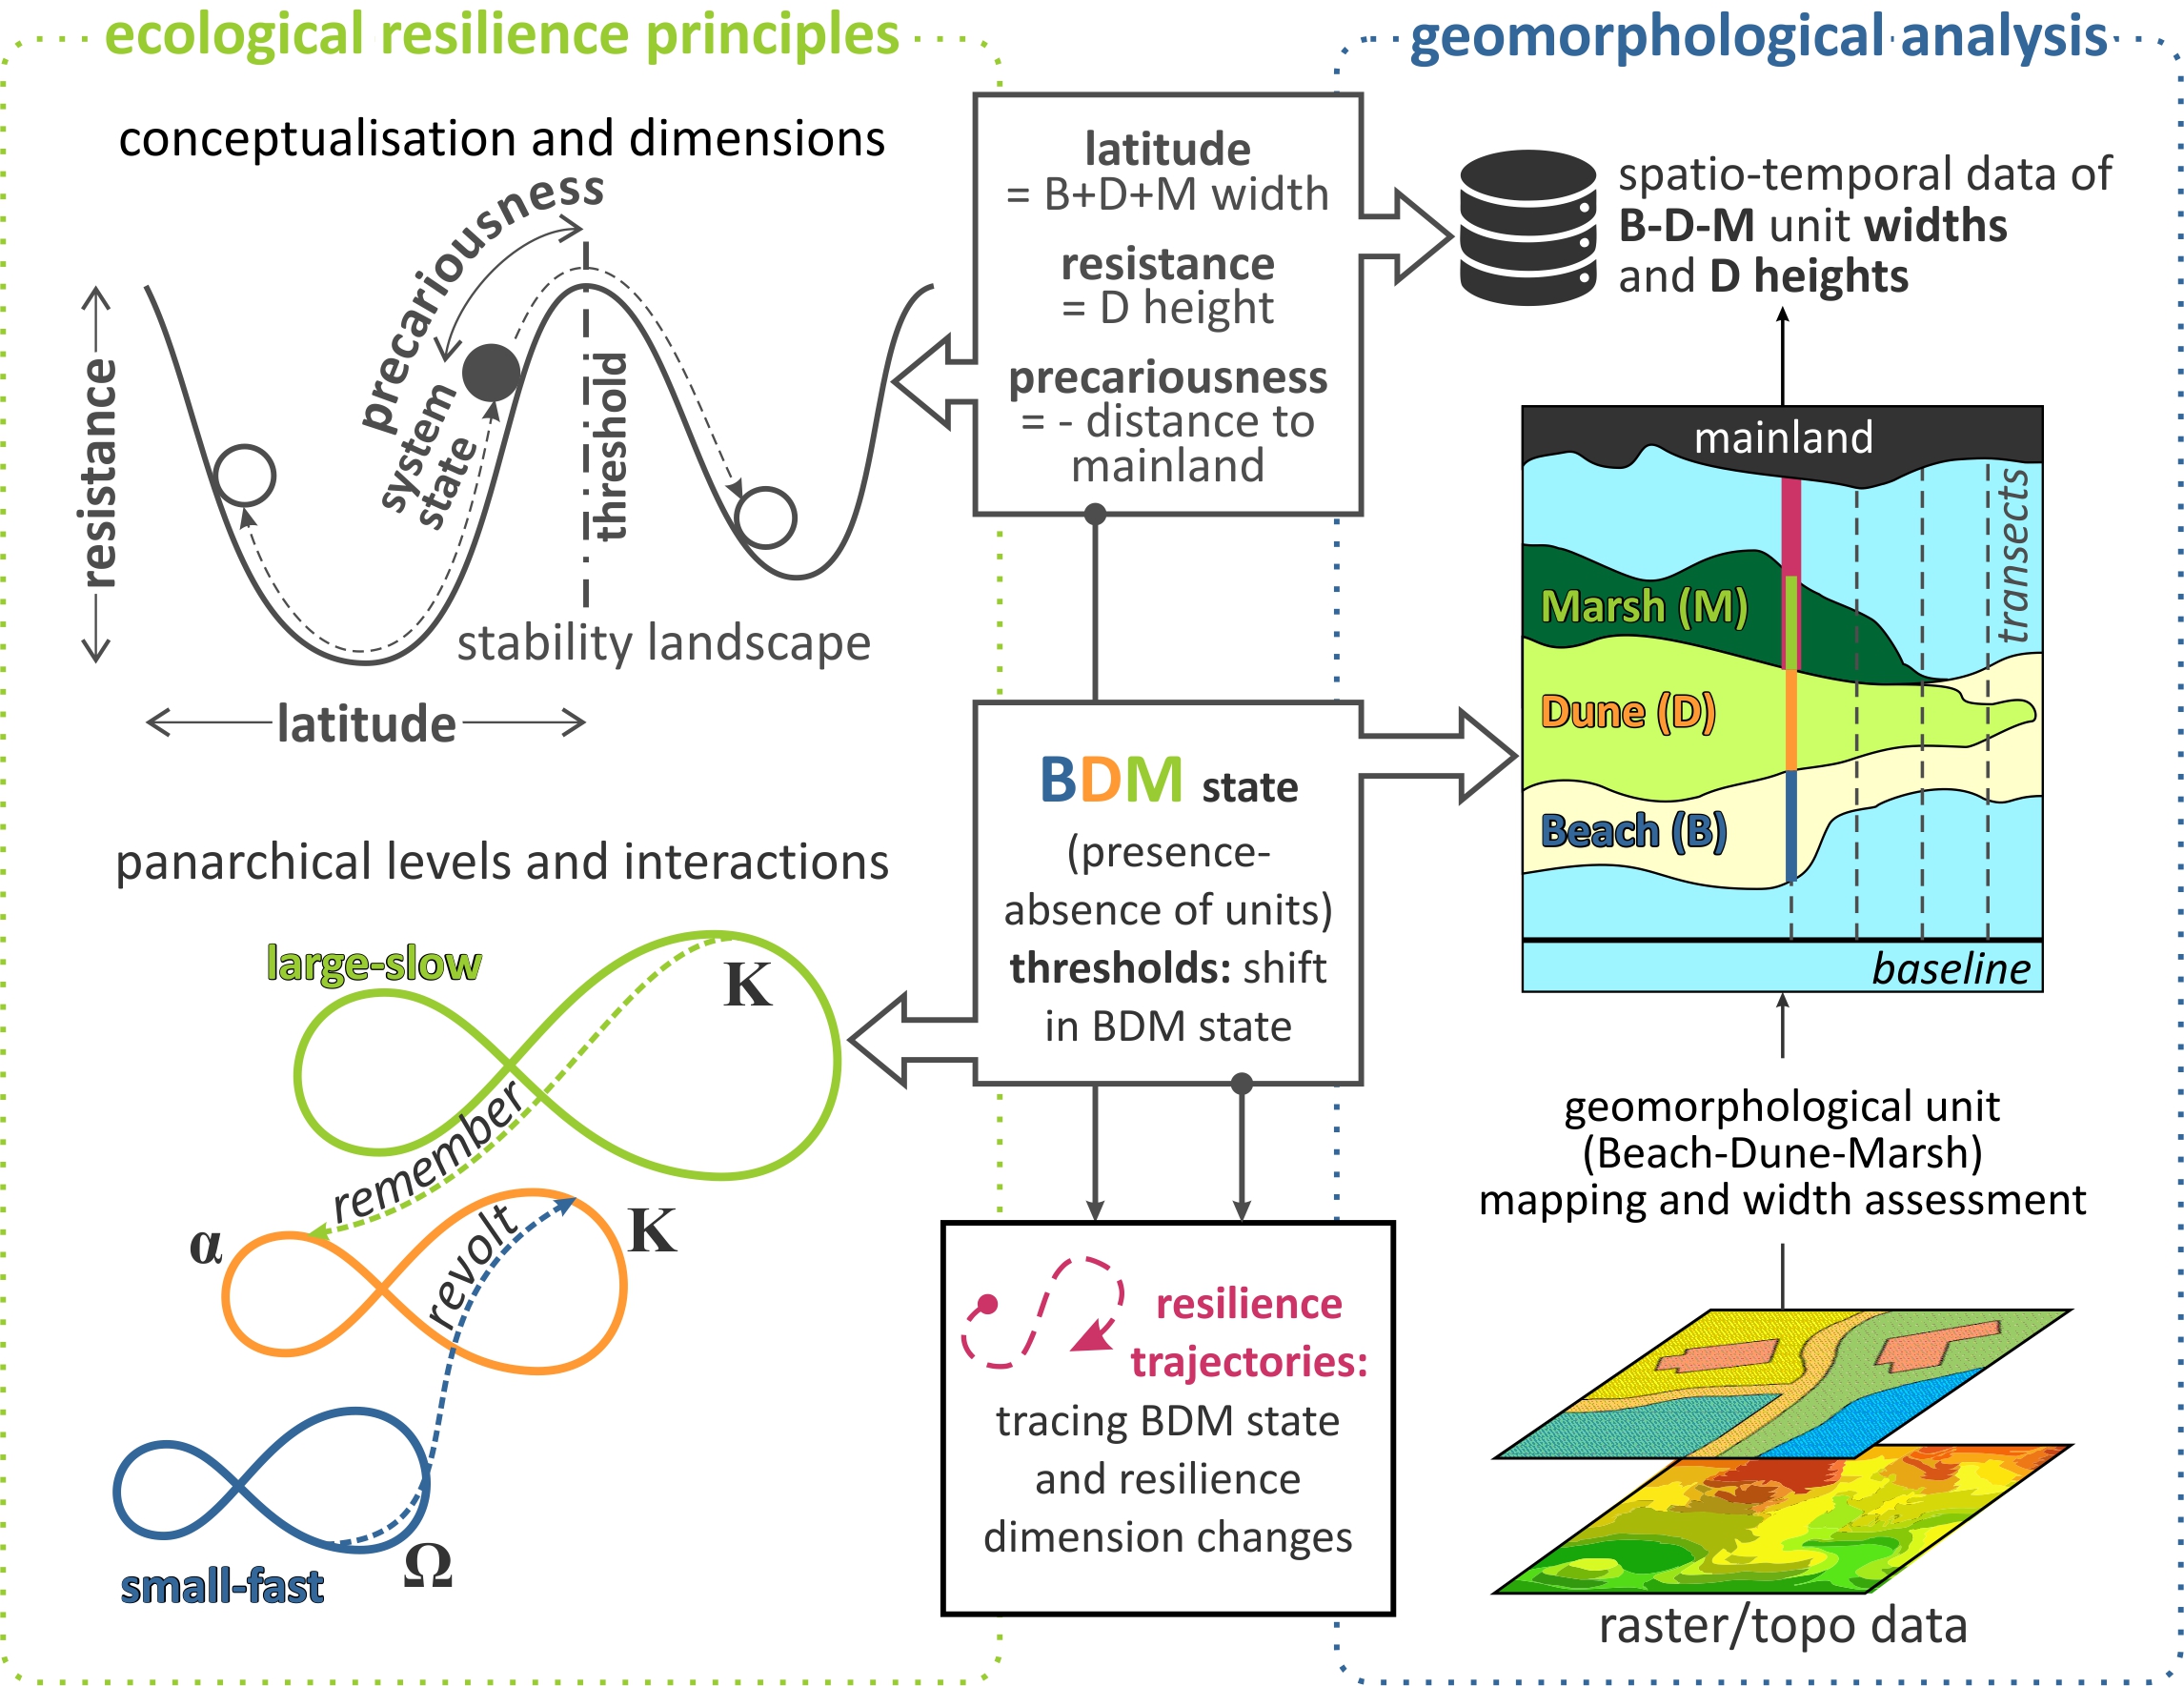 Barrier island resilience assessment: Applying the ecological principles to geomorphological data